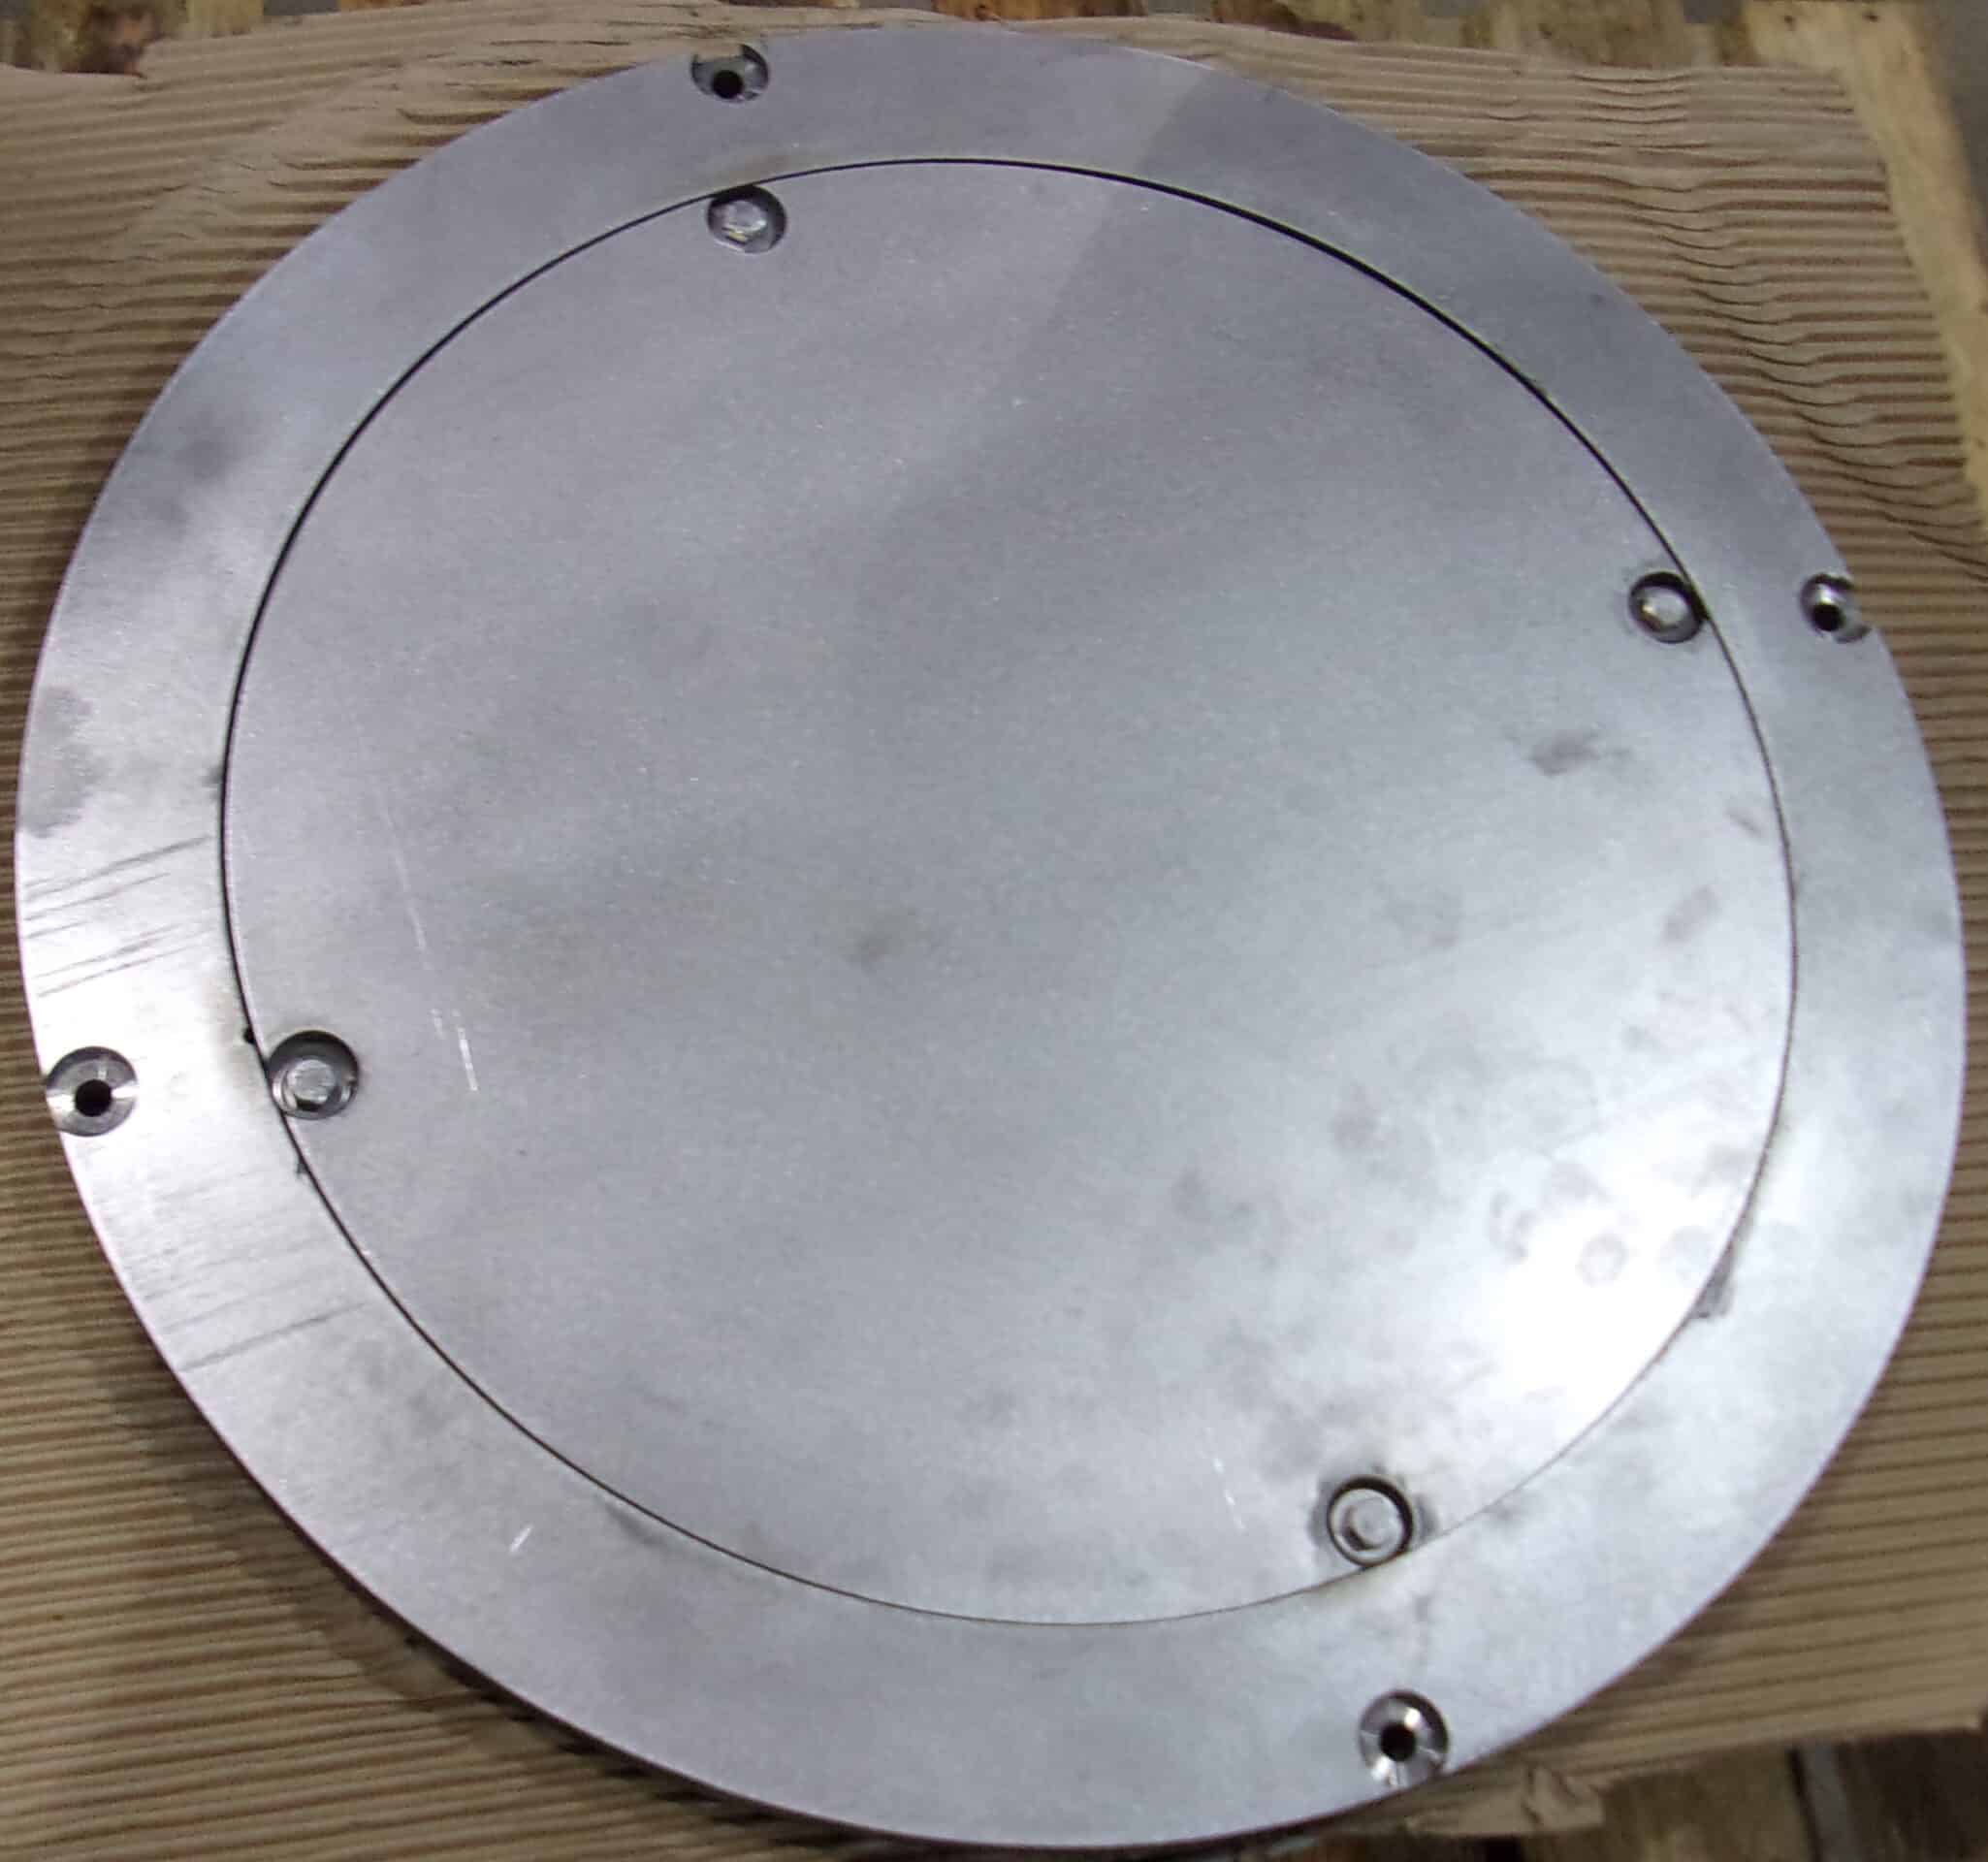 Center Access Stainless Steel Manhole Cover